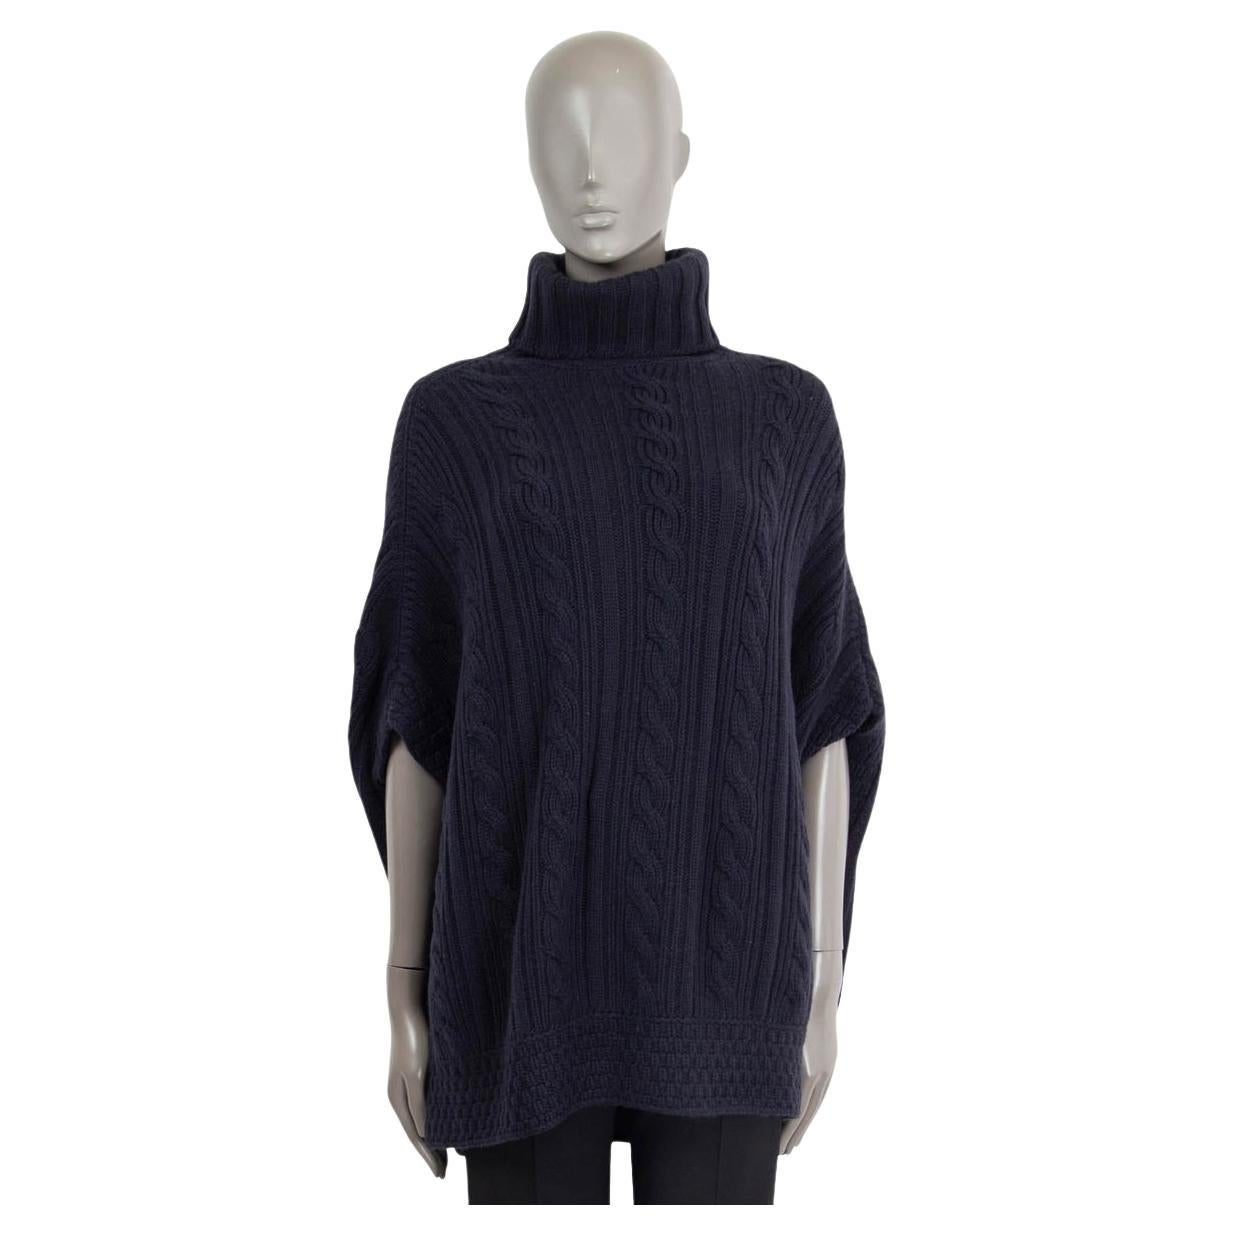 LORO PIANA navy blue cashmere CABLE KNIT TURTLENECK PONCHO Sweater 42 M For Sale